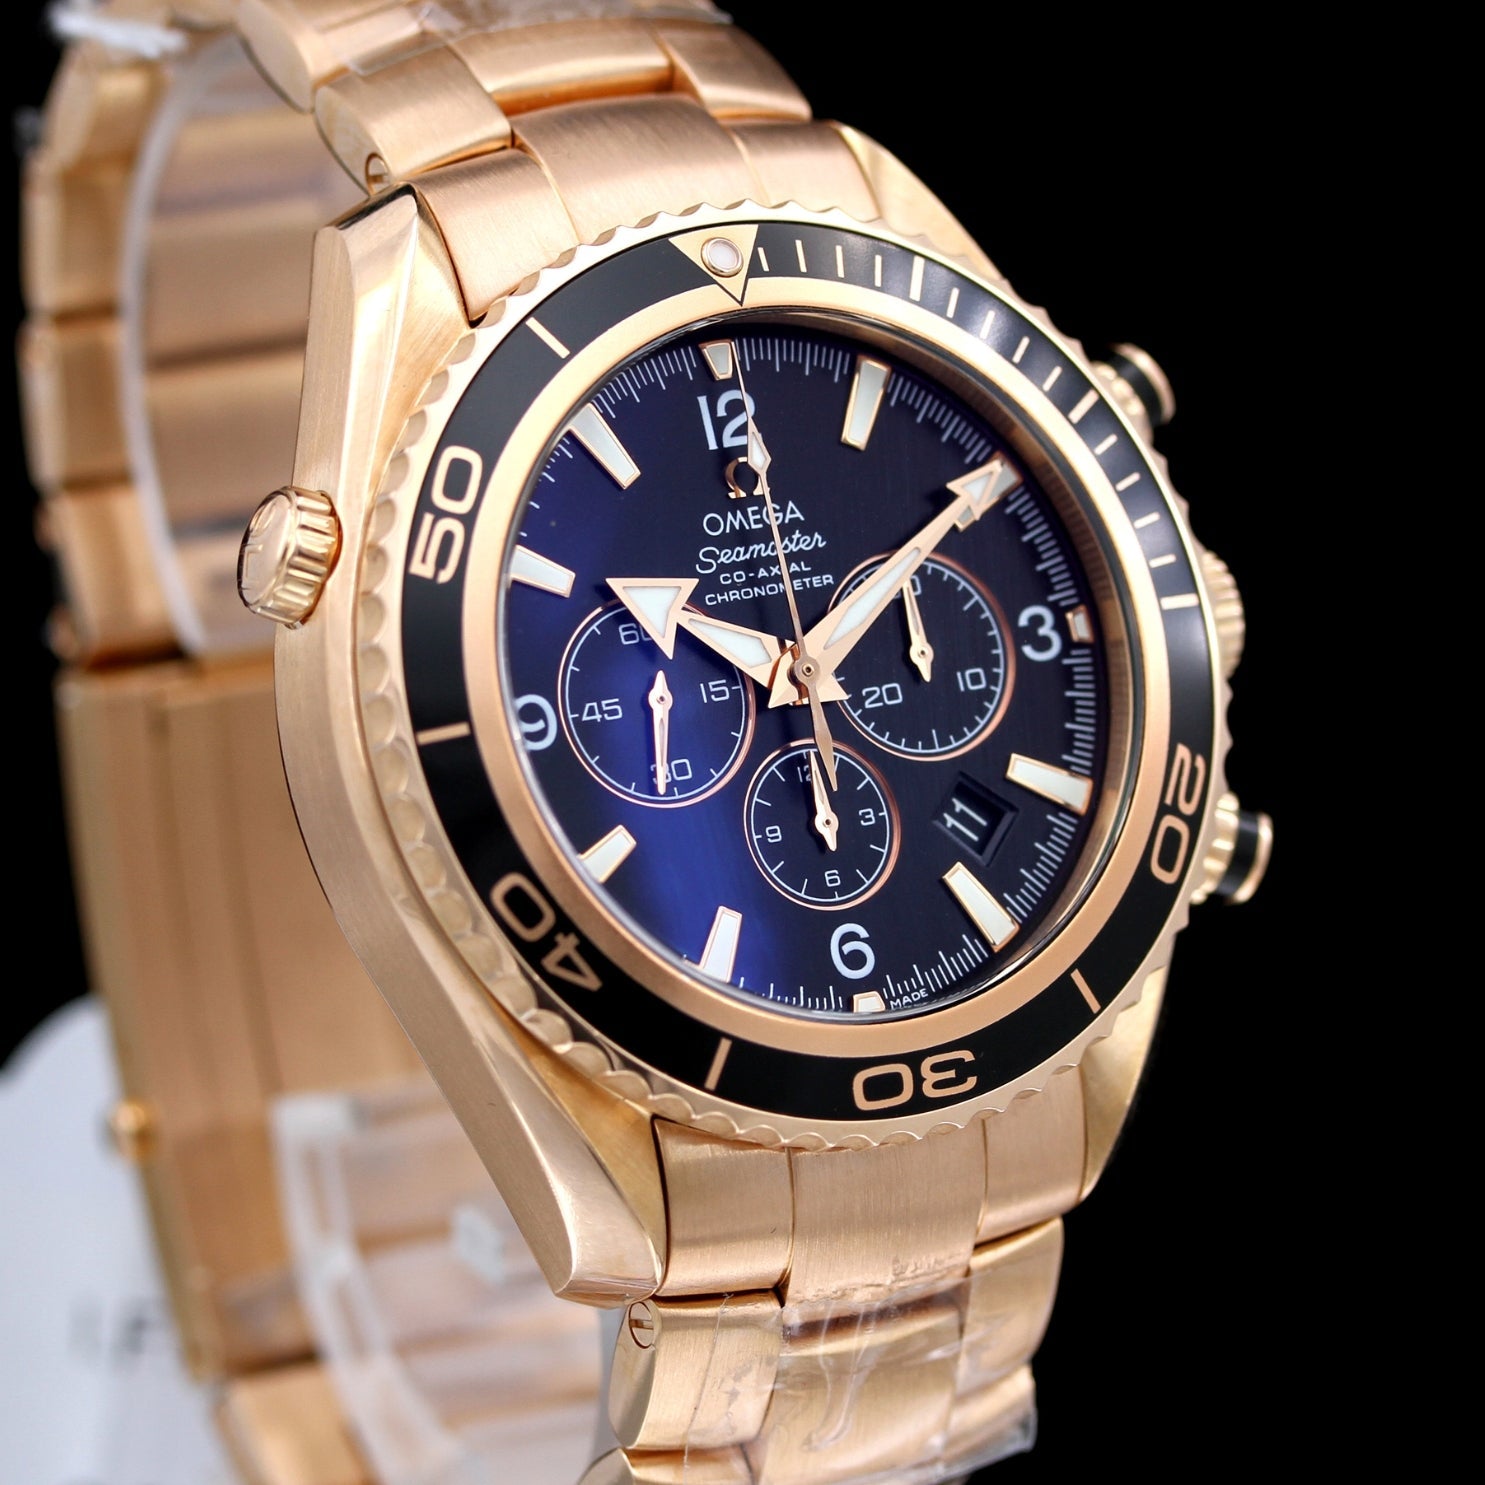 Omega Seamaster Planet Ocean 45.5mm, Rotgold, Ref. 222.60.46.50.01.001, B+P - LUXUHRIA